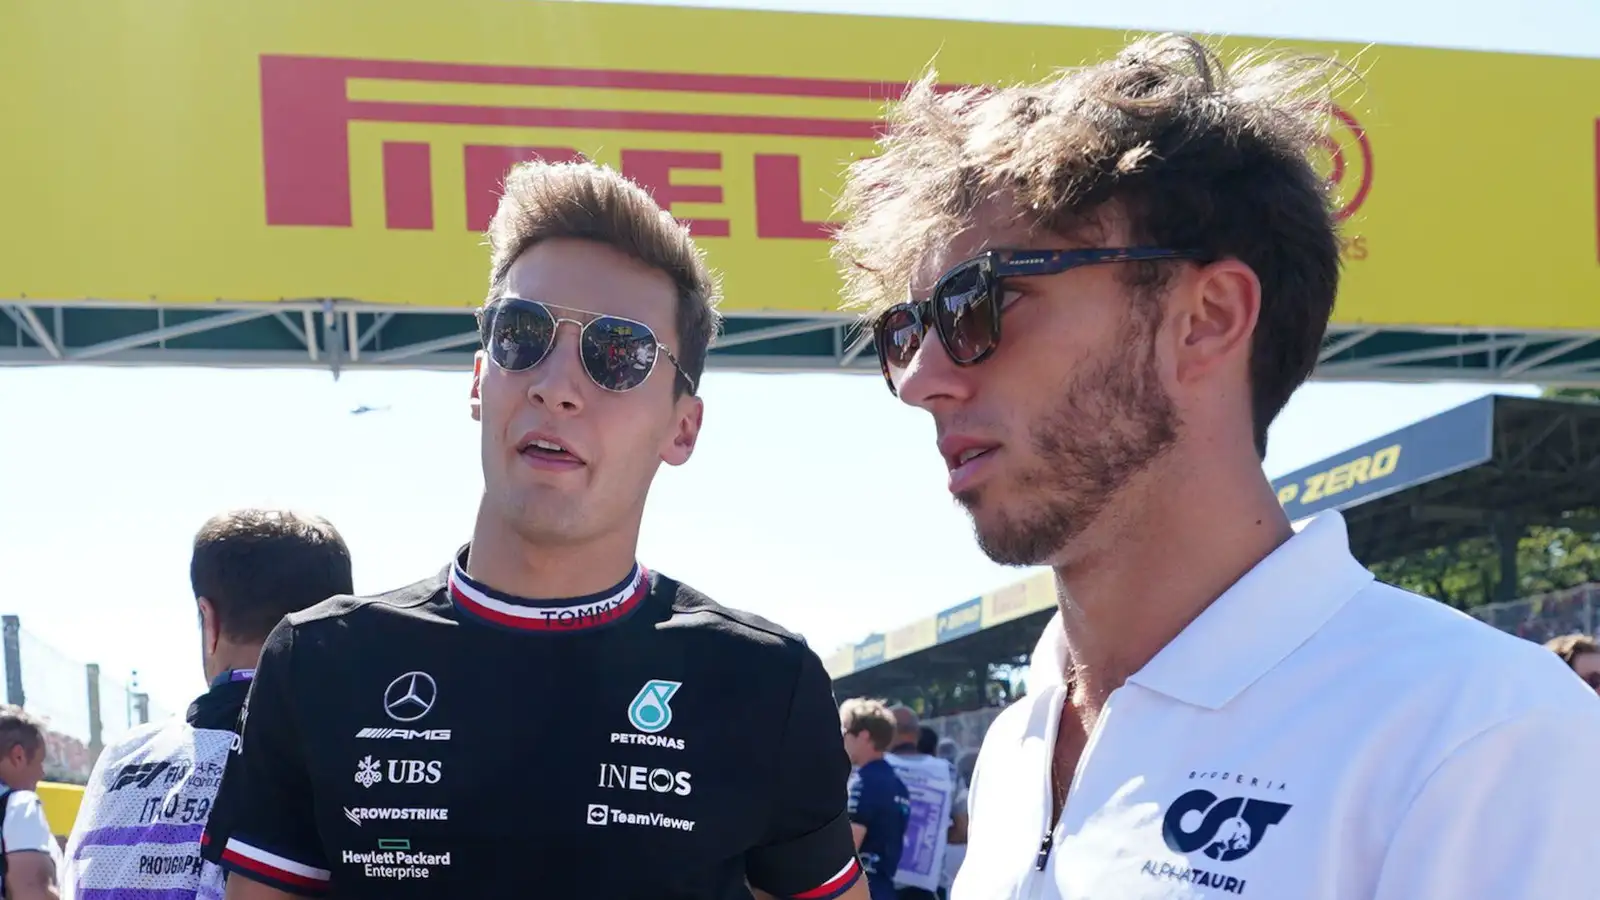 Mercedes' George Russell speaking with Pierre Gasly. Monza September 2022.